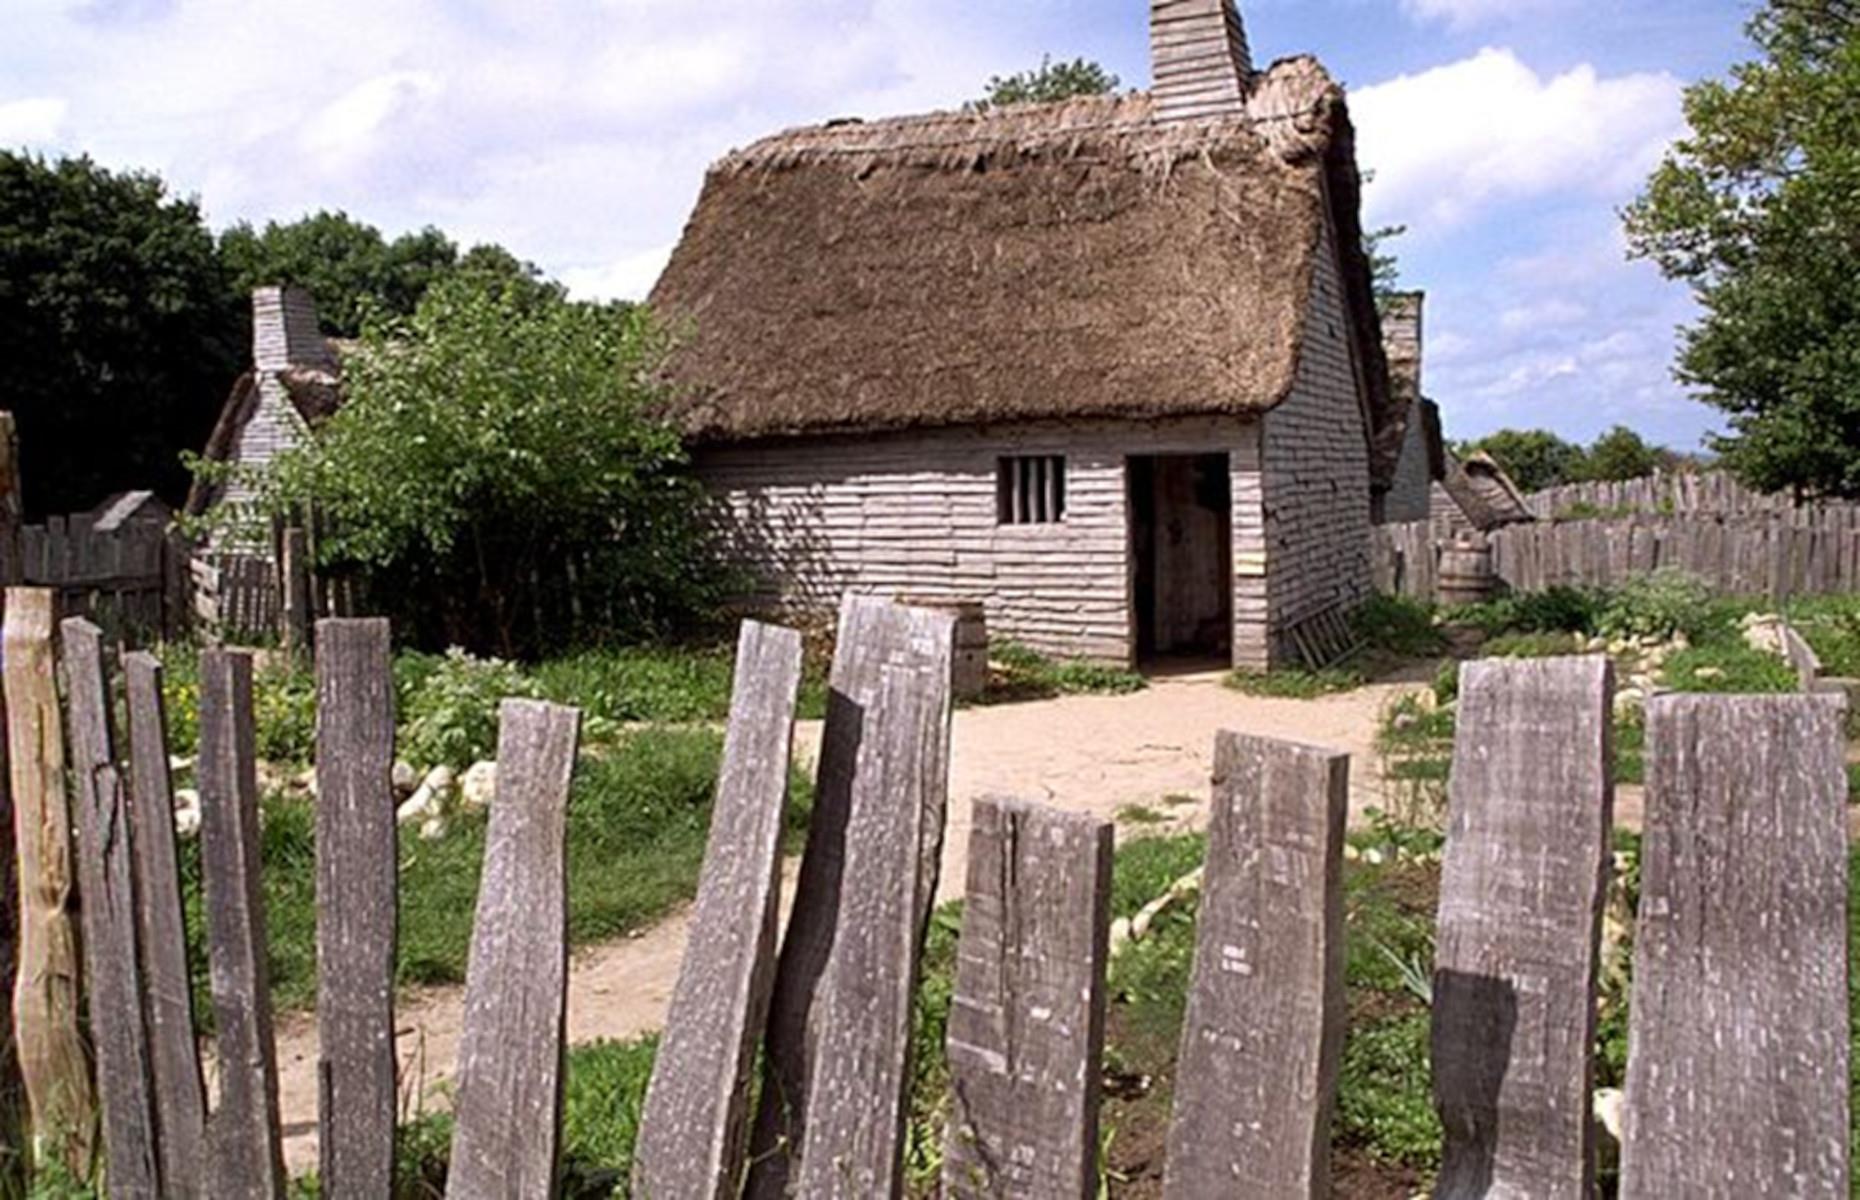 <p>The English village features a collection of reconstructed 17th-century timber-framed houses, each outfitted with reproduction furniture, household items, and articles of clothing. Most of these structures consist of only one room, and the barest of essentials. The village is set in the year 1627, when the settlers were desperately fighting for survival in the harsh New England climate. In the surrounding gardens and fields, third-person costumed interpreters pound corn, pull weeds, or even engage in a ‘muster drill’ led by Captain Myles Standish, commander of the Plymouth Colony Militia.</p>